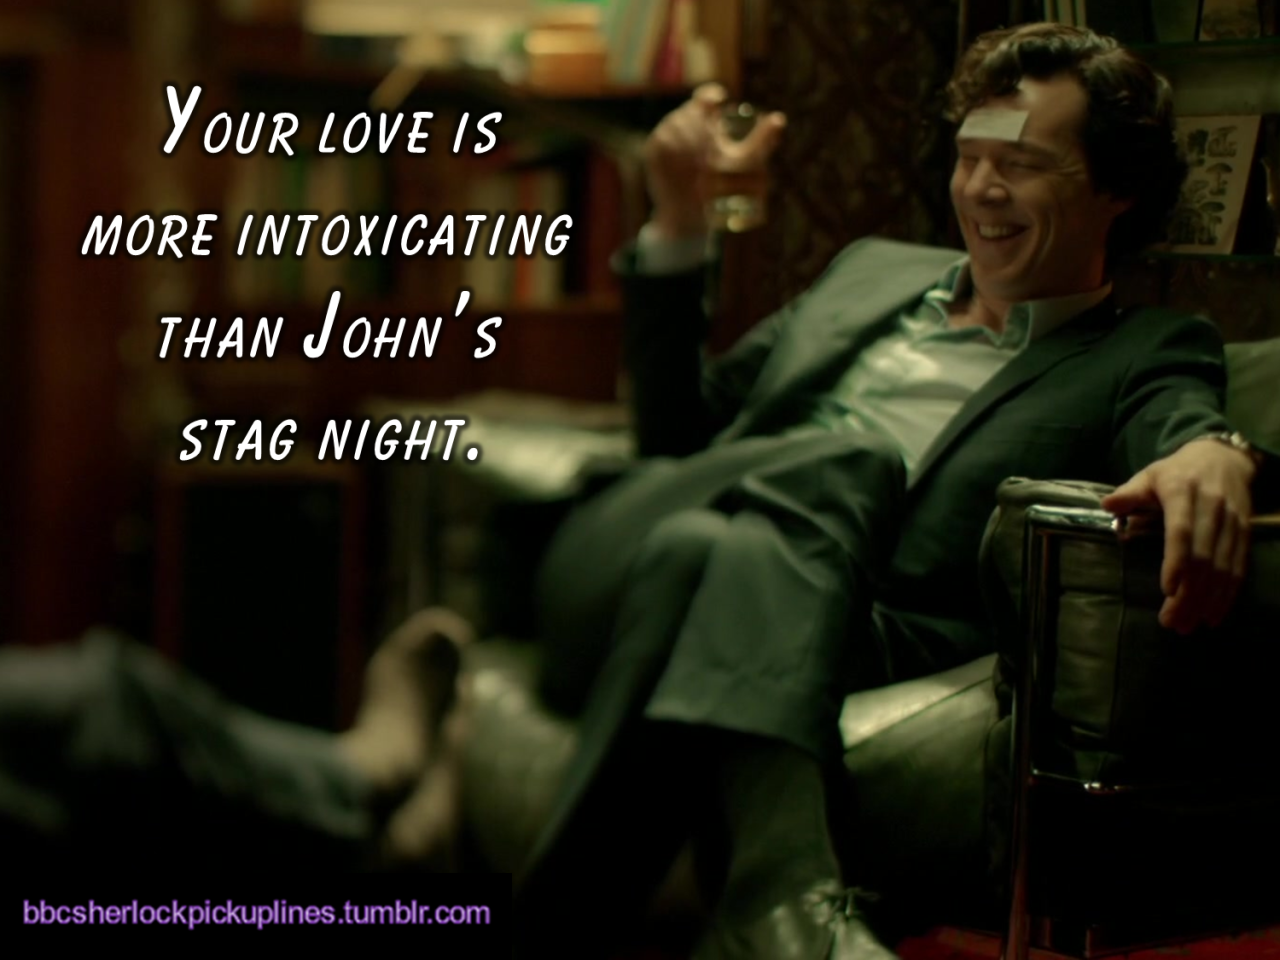 â€œYour love is more intoxicating than Johnâ€™s stag night.â€